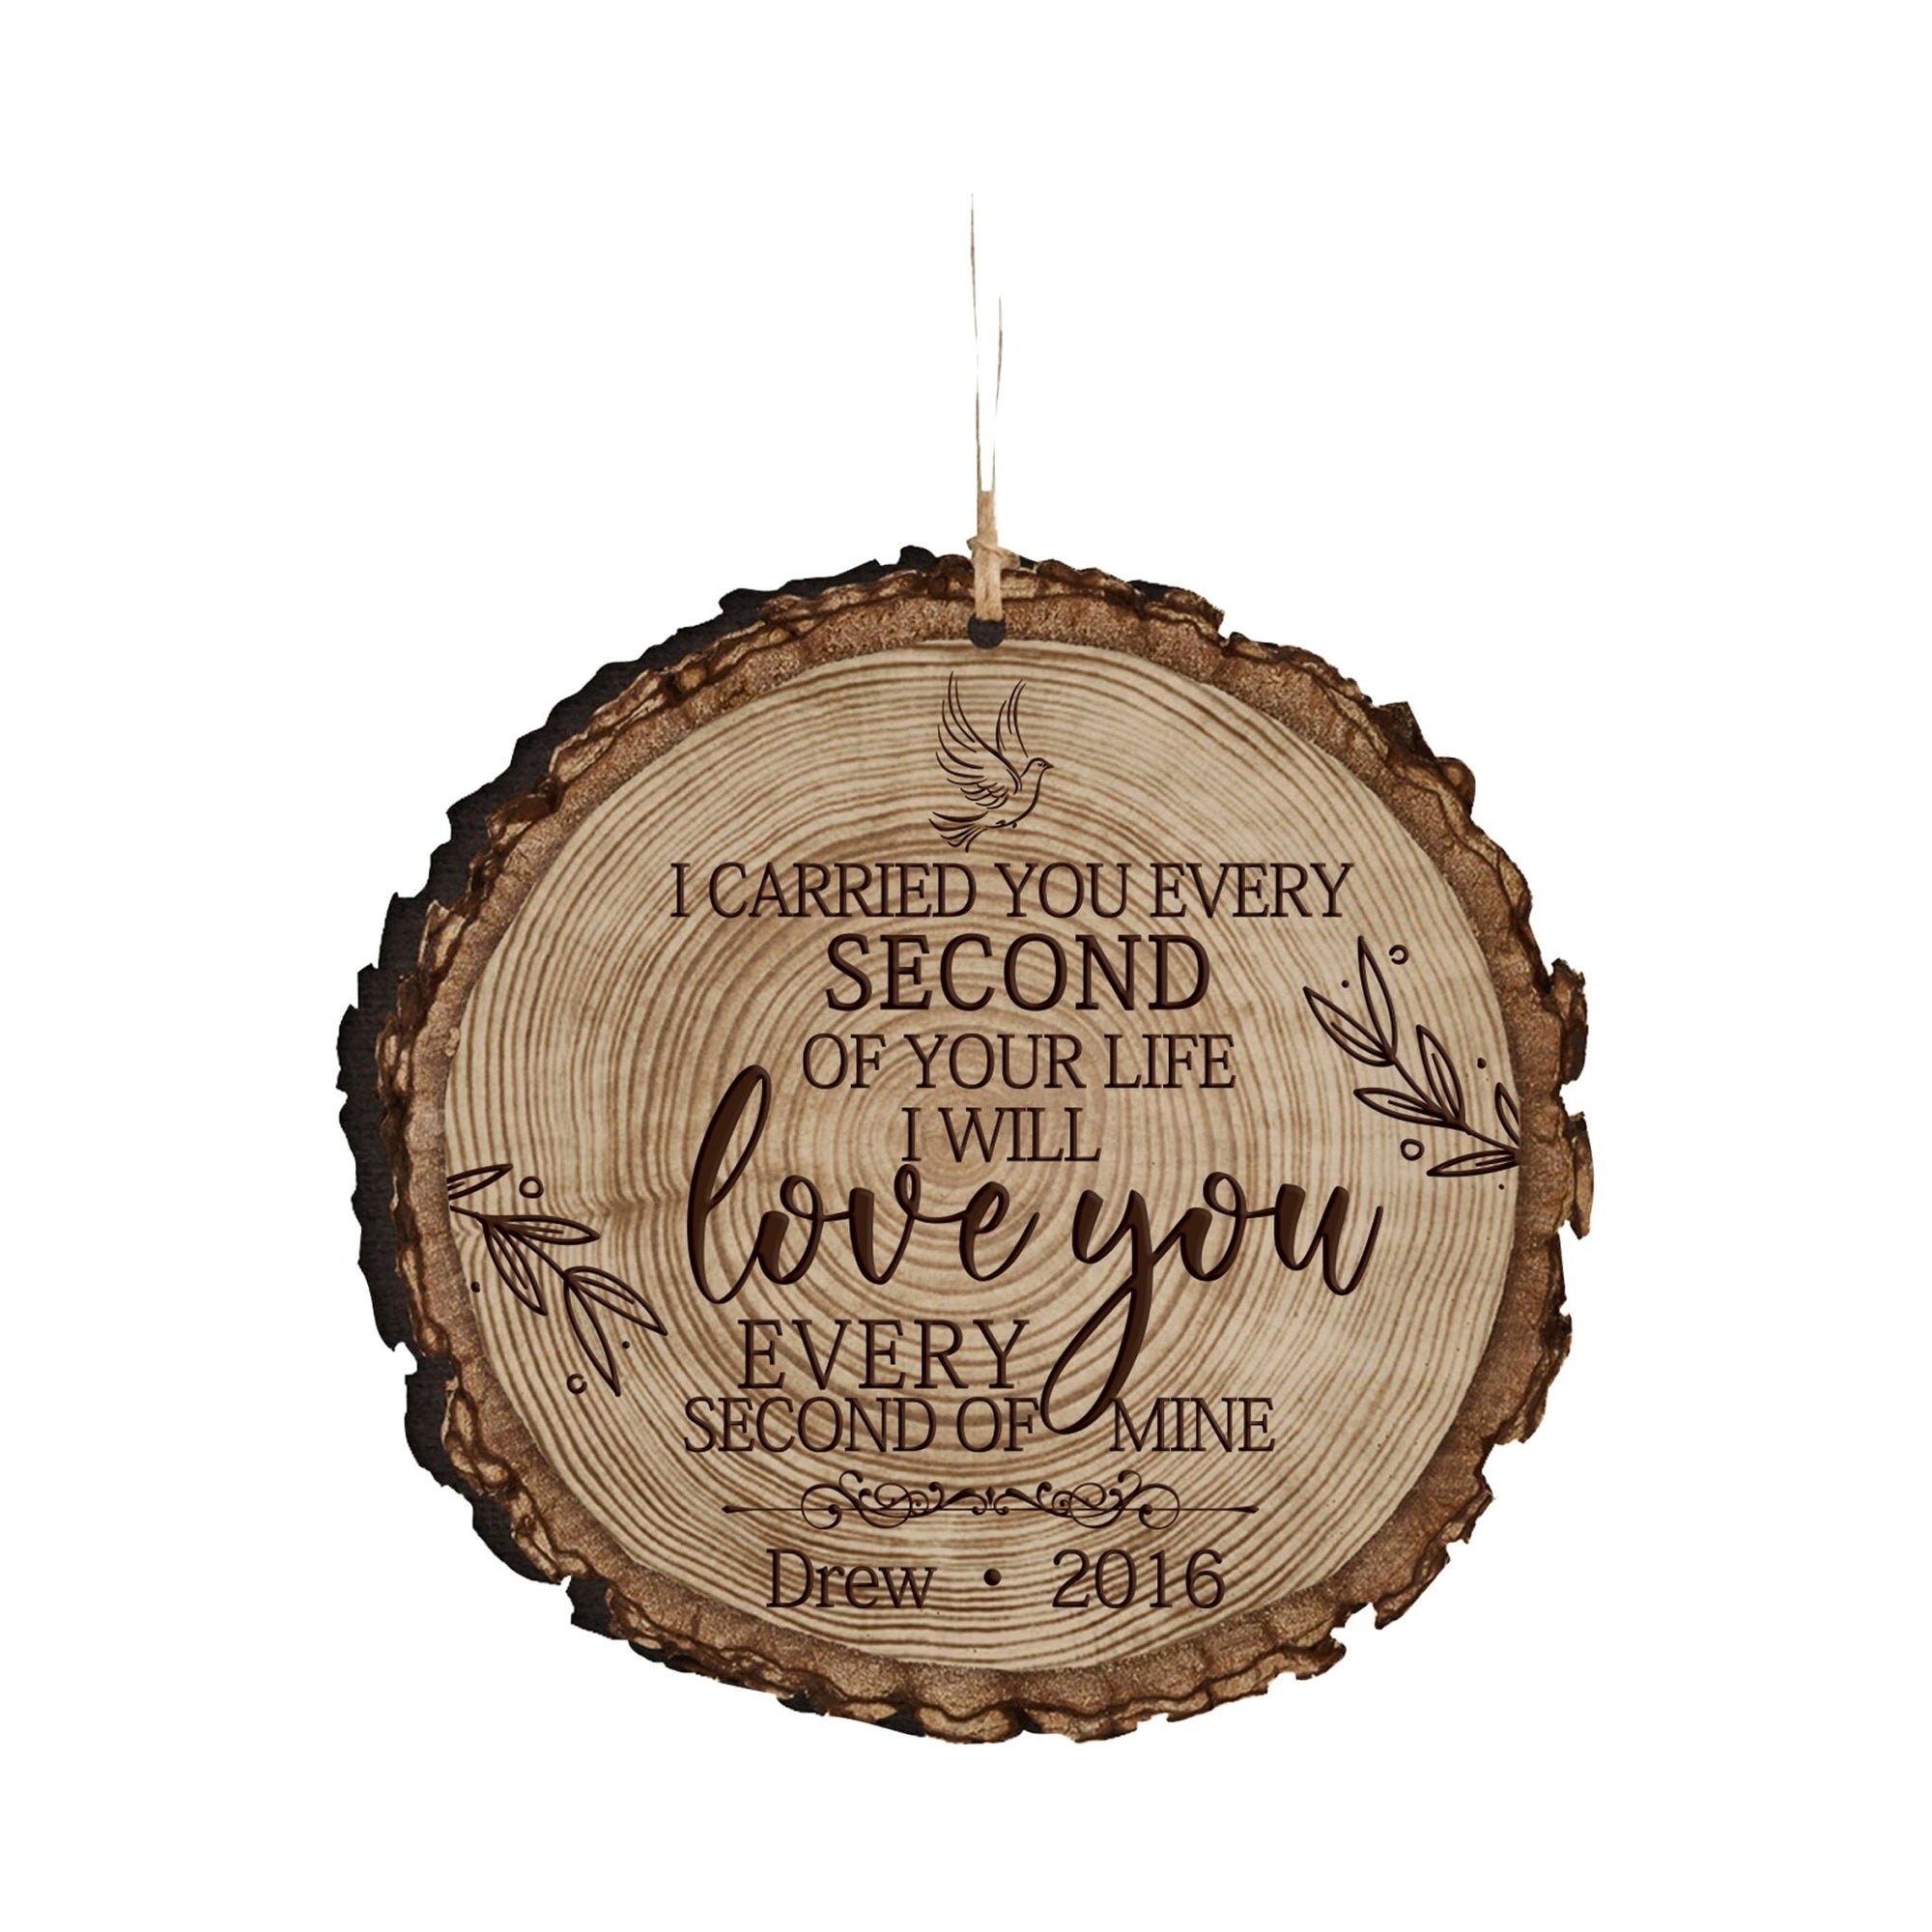 Personalized Engraved Memorial Ornament - I Carried You (dove) - LifeSong Milestones